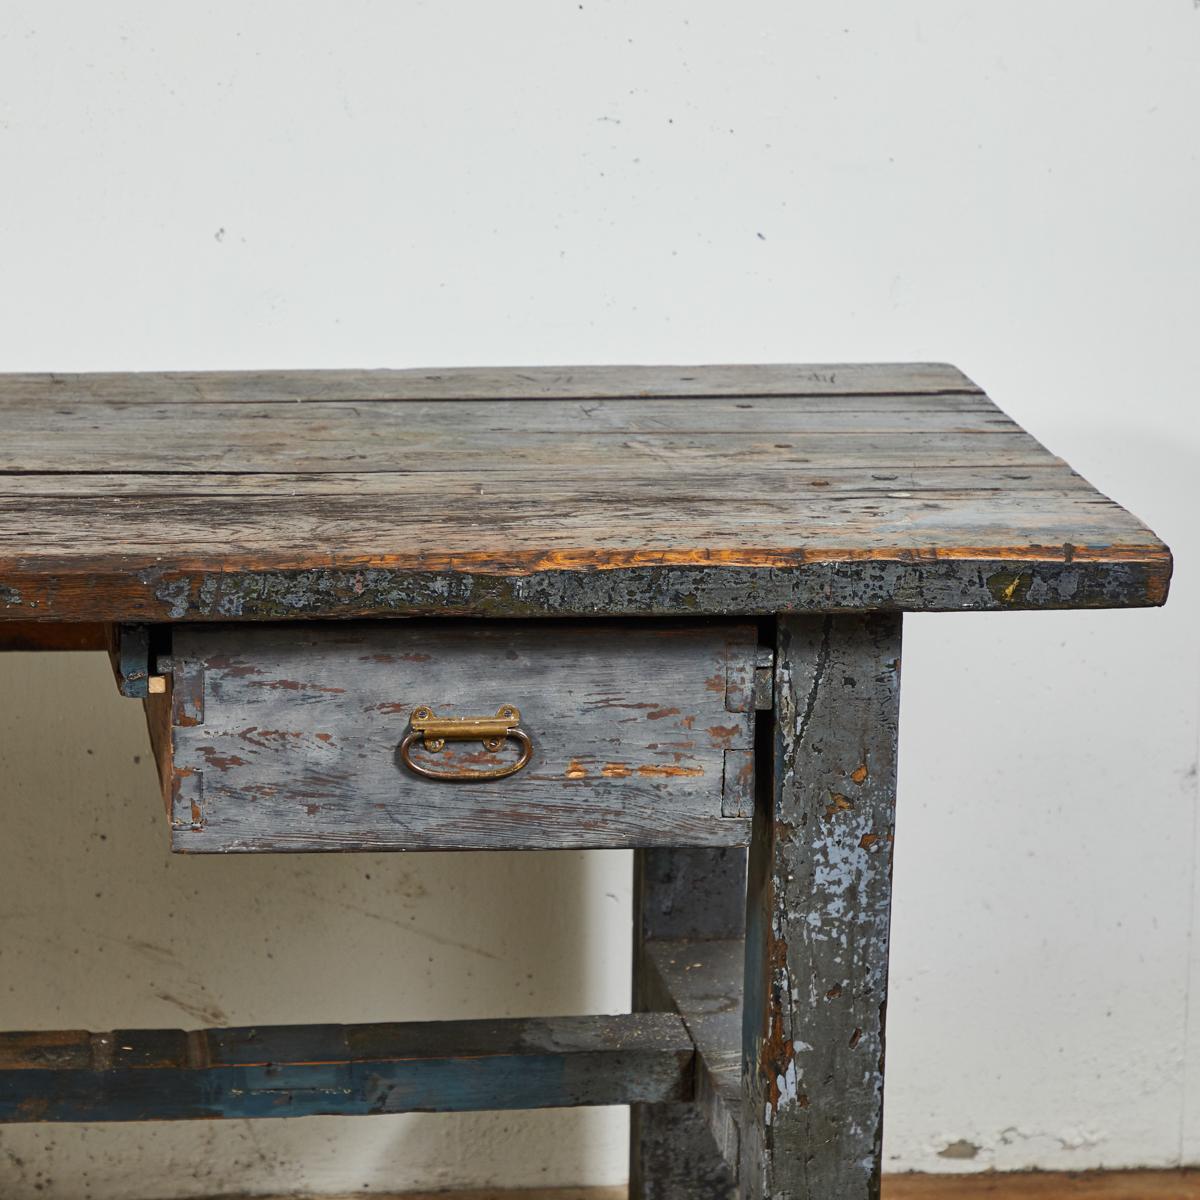 19th century English wood plank top work table with great antique character. The table has one-drawer and straight legs joined by stretchers.